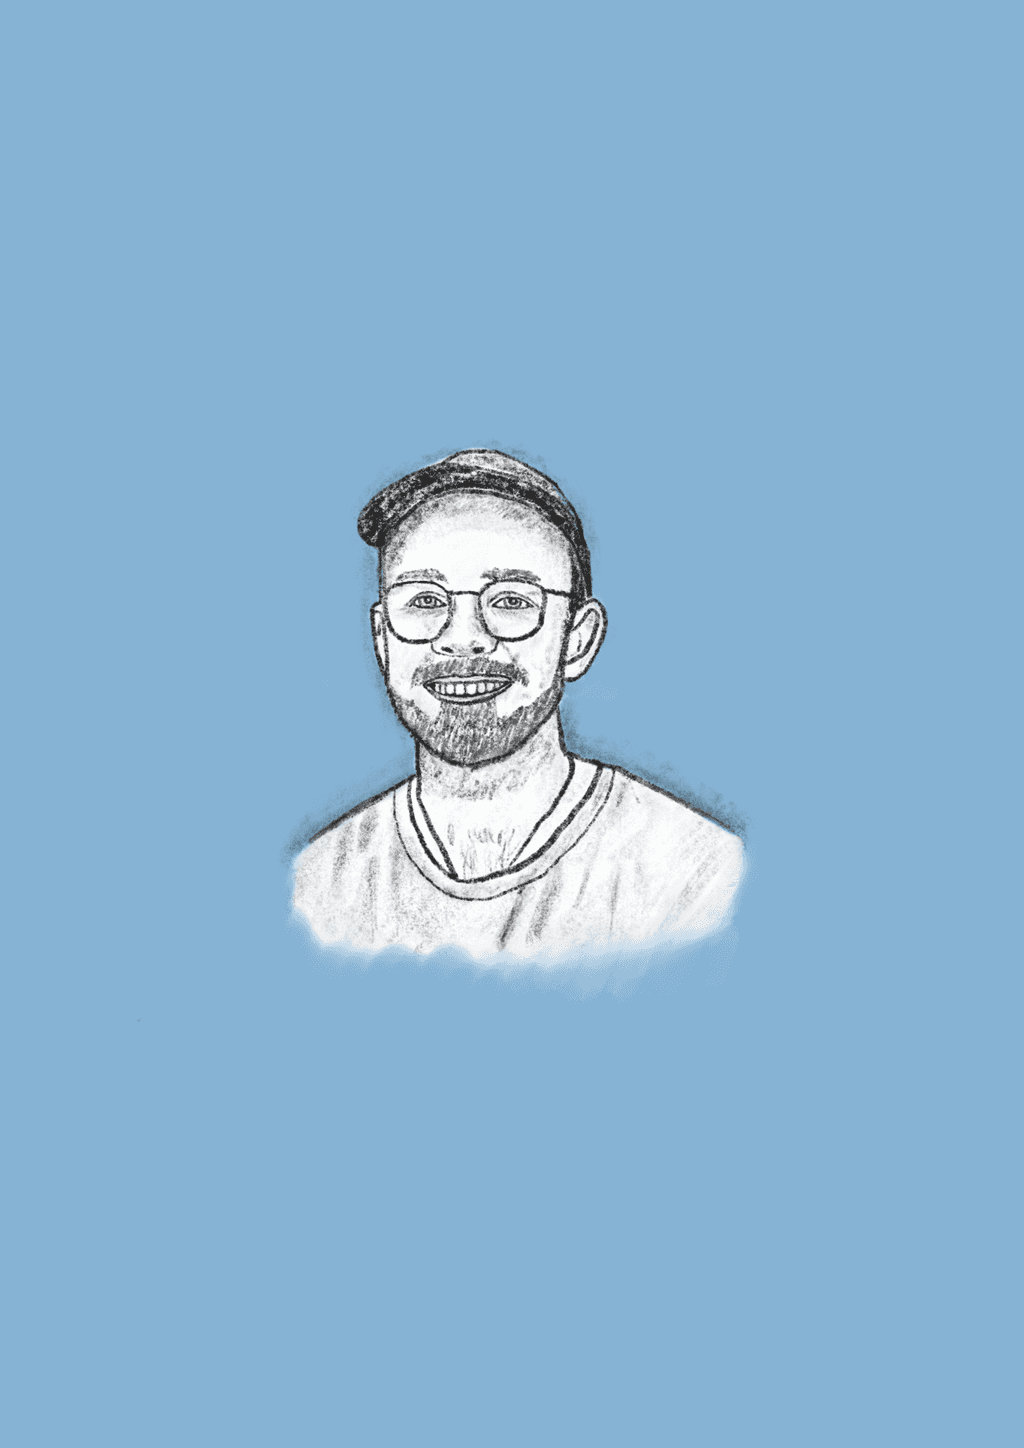 A digital pencil sketched image of a guy with a cap, glasses and beard on a pale blue/grey background